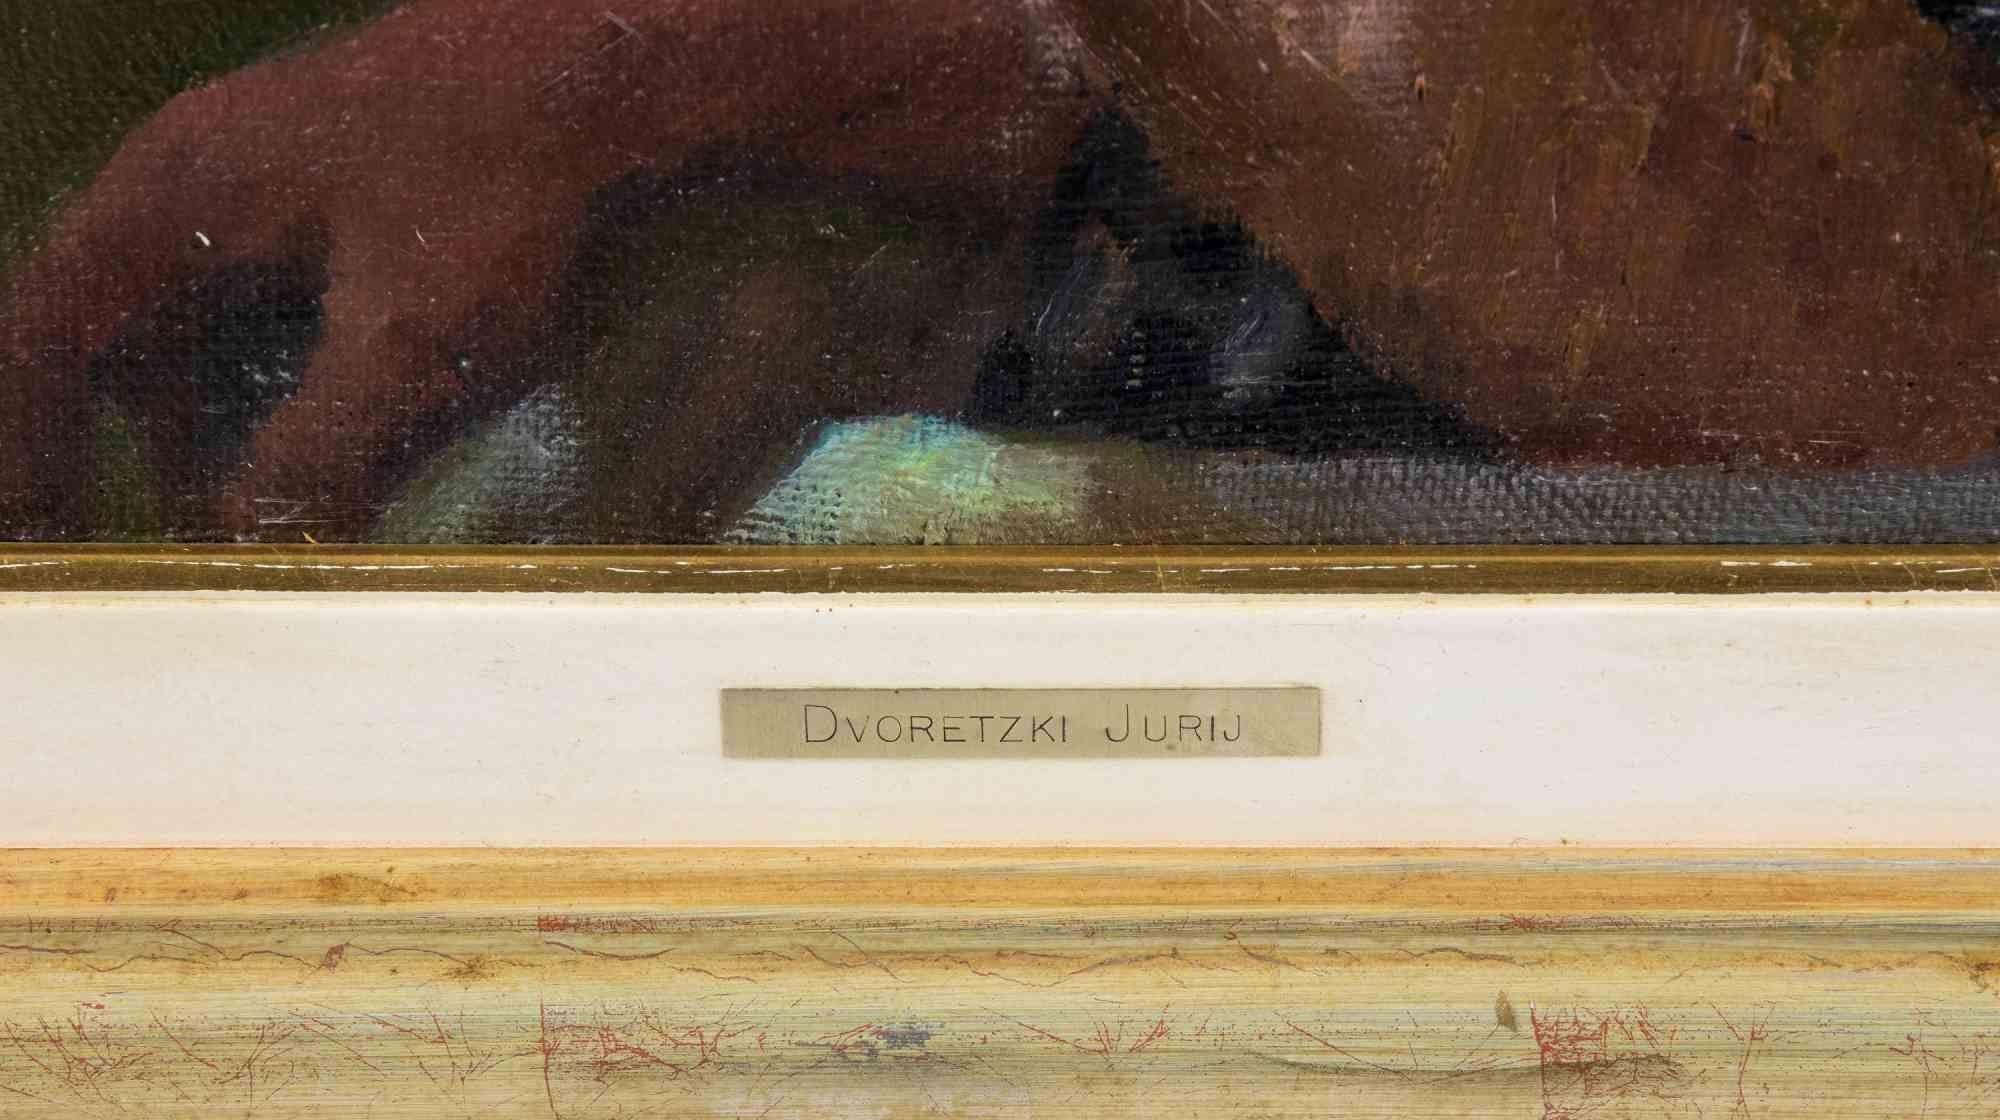 Self Portrait is a modern artwork realized by Jurij Dvoretzky in 1949.

Mixed colored oil painting on canvas.

Metal label on frame with artist's name.

On the back label of Galleria Cinquantasei.

Includes frame

